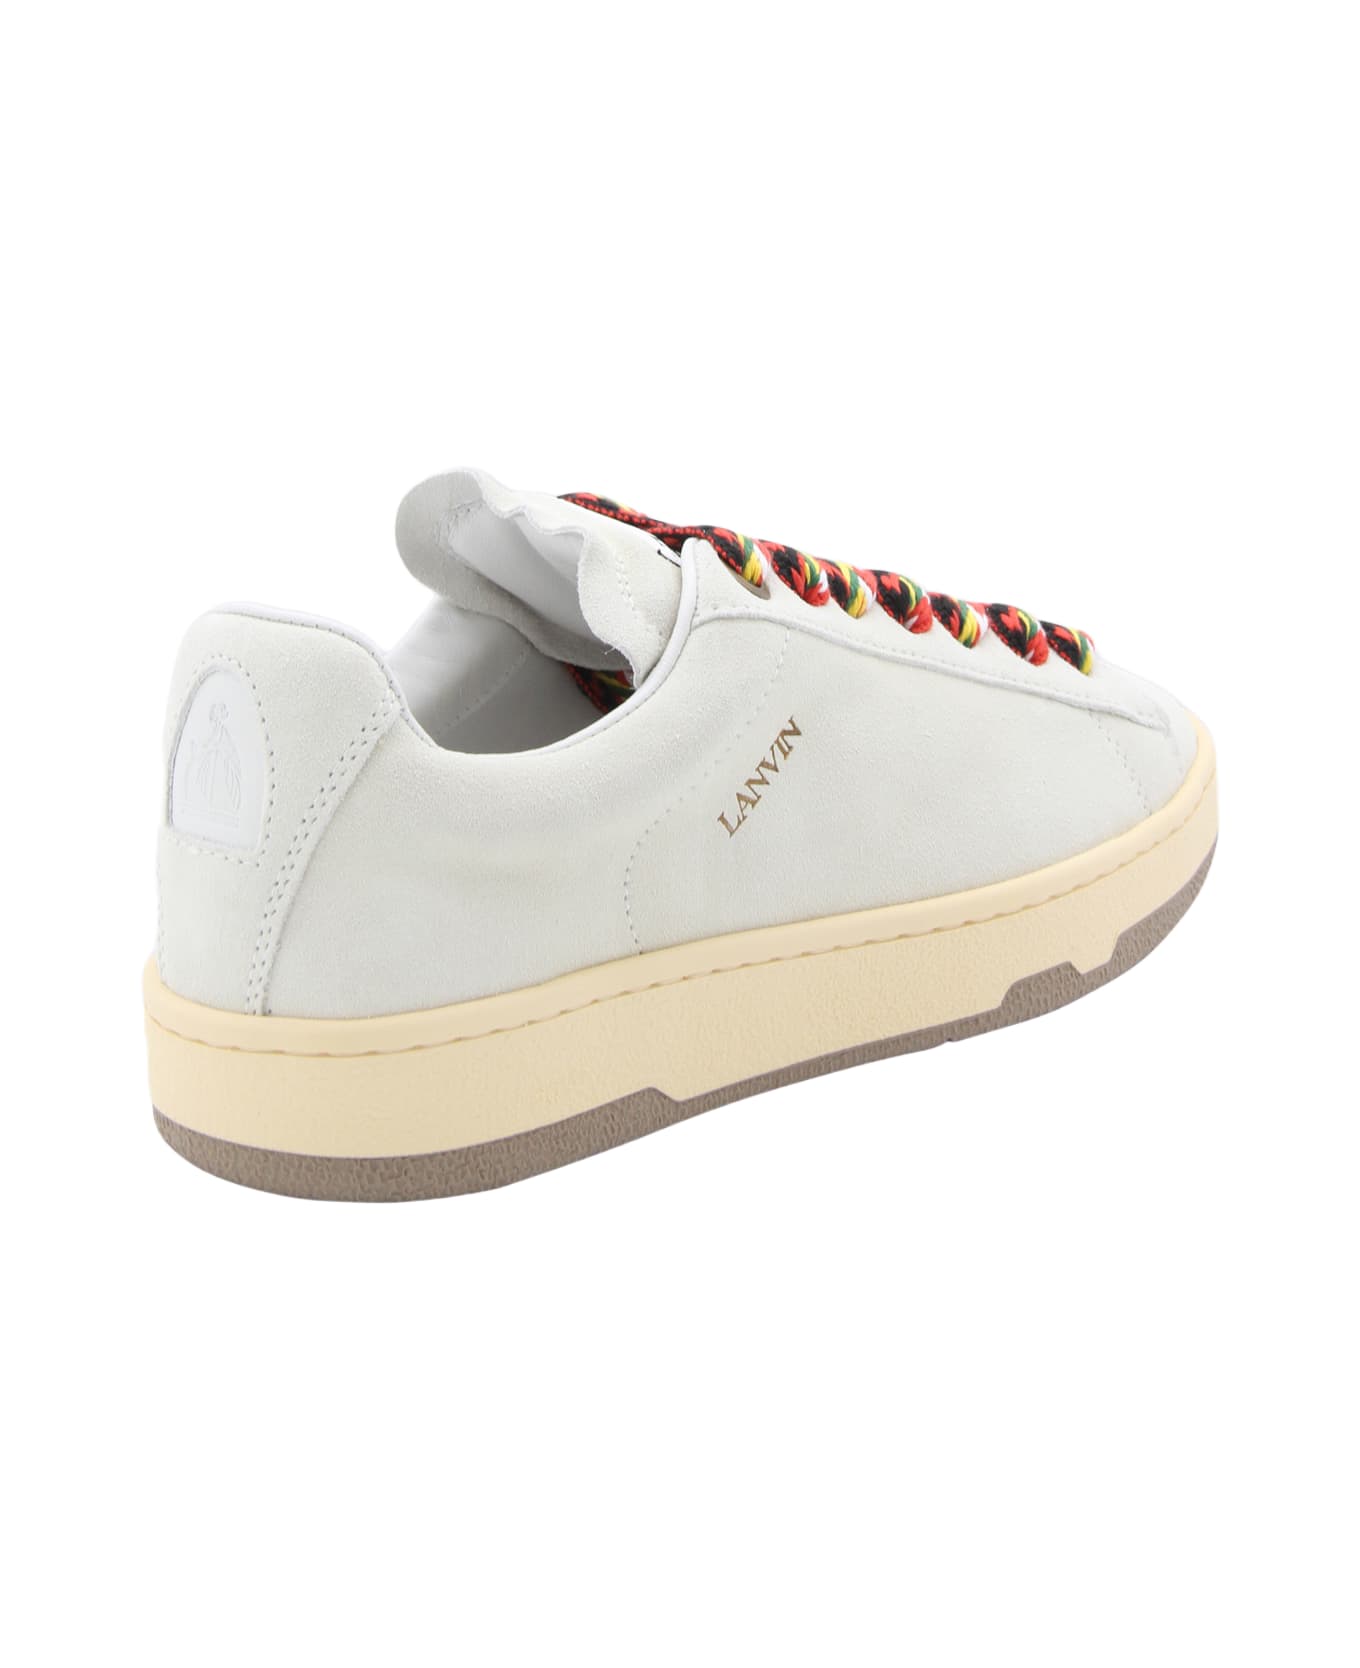 Lanvin White Leather Curb Lite Sneakers - White ウェッジシューズ